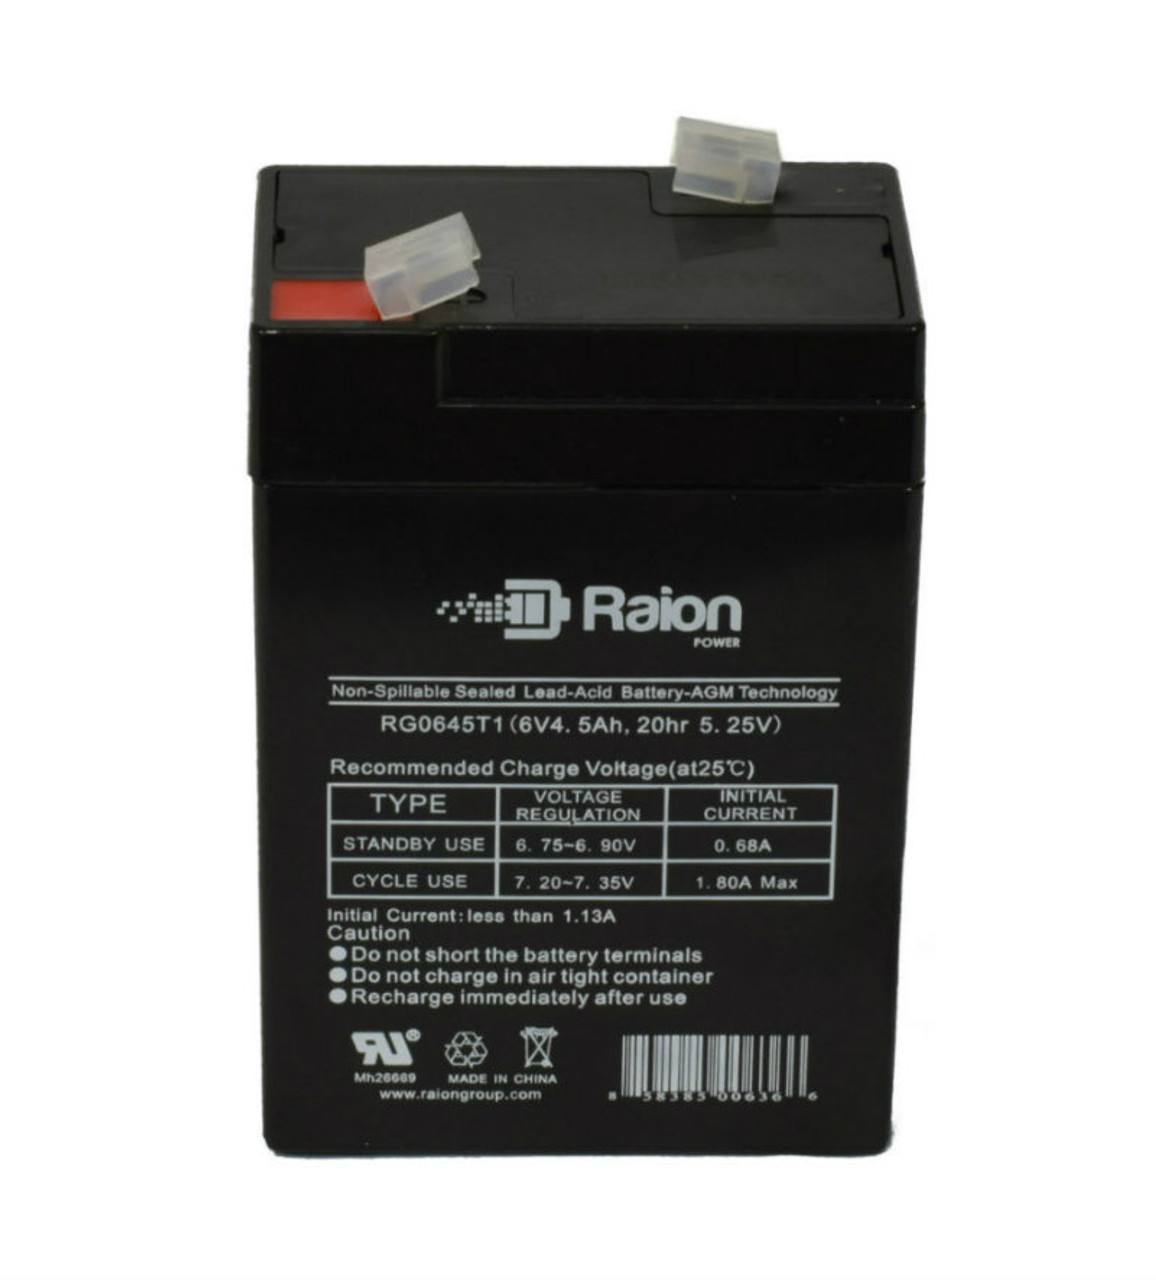 Raion Power RG0645T1 Replacement Battery Cartridge for VCELL 6VC5.0